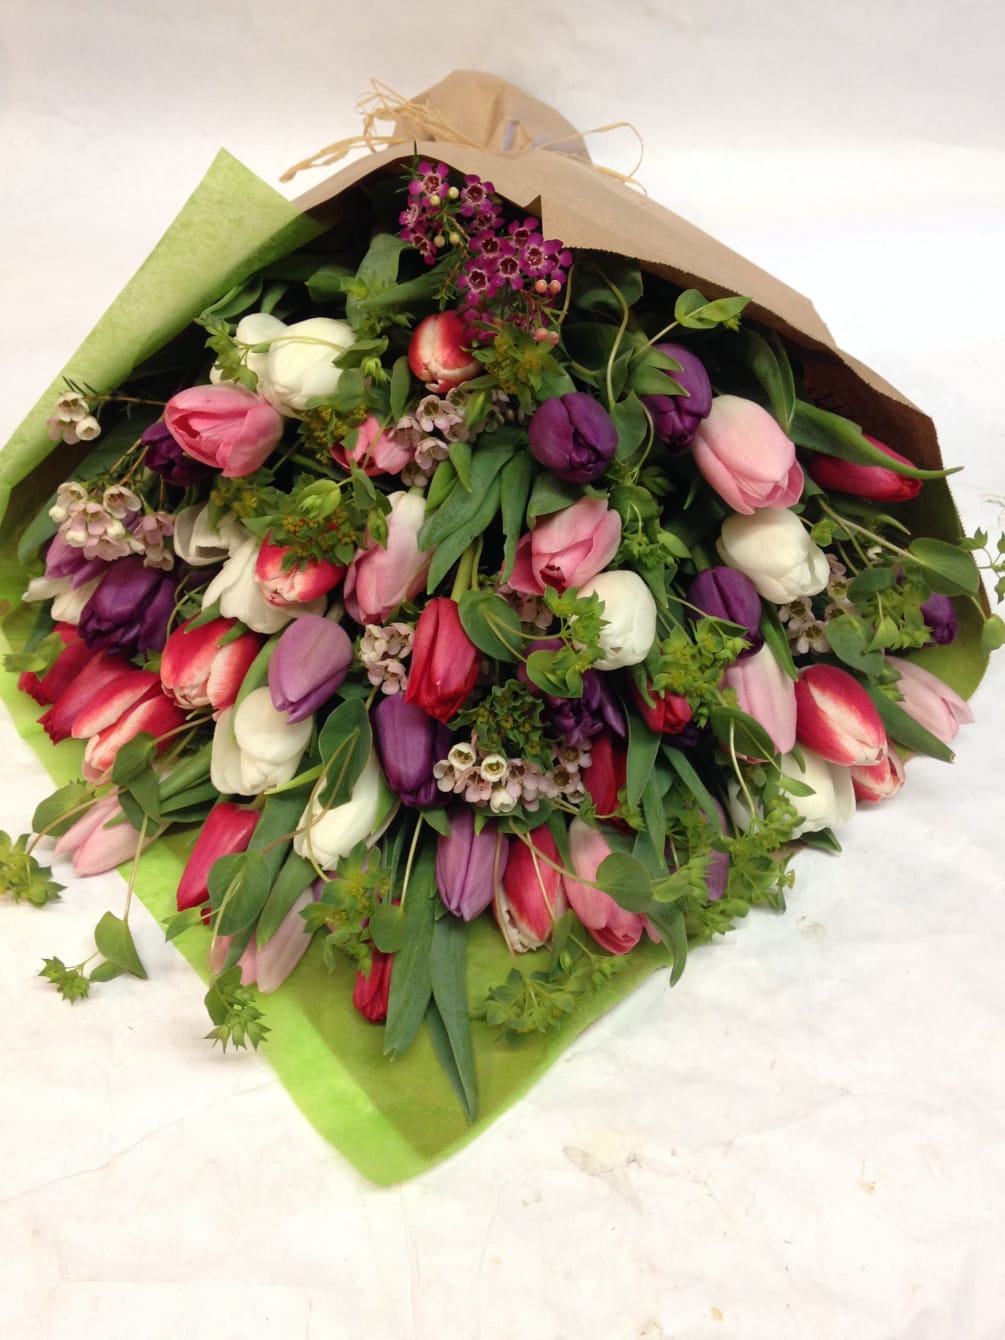 This assortment comes complete with 60 stems of multicolored tulips and complimentary